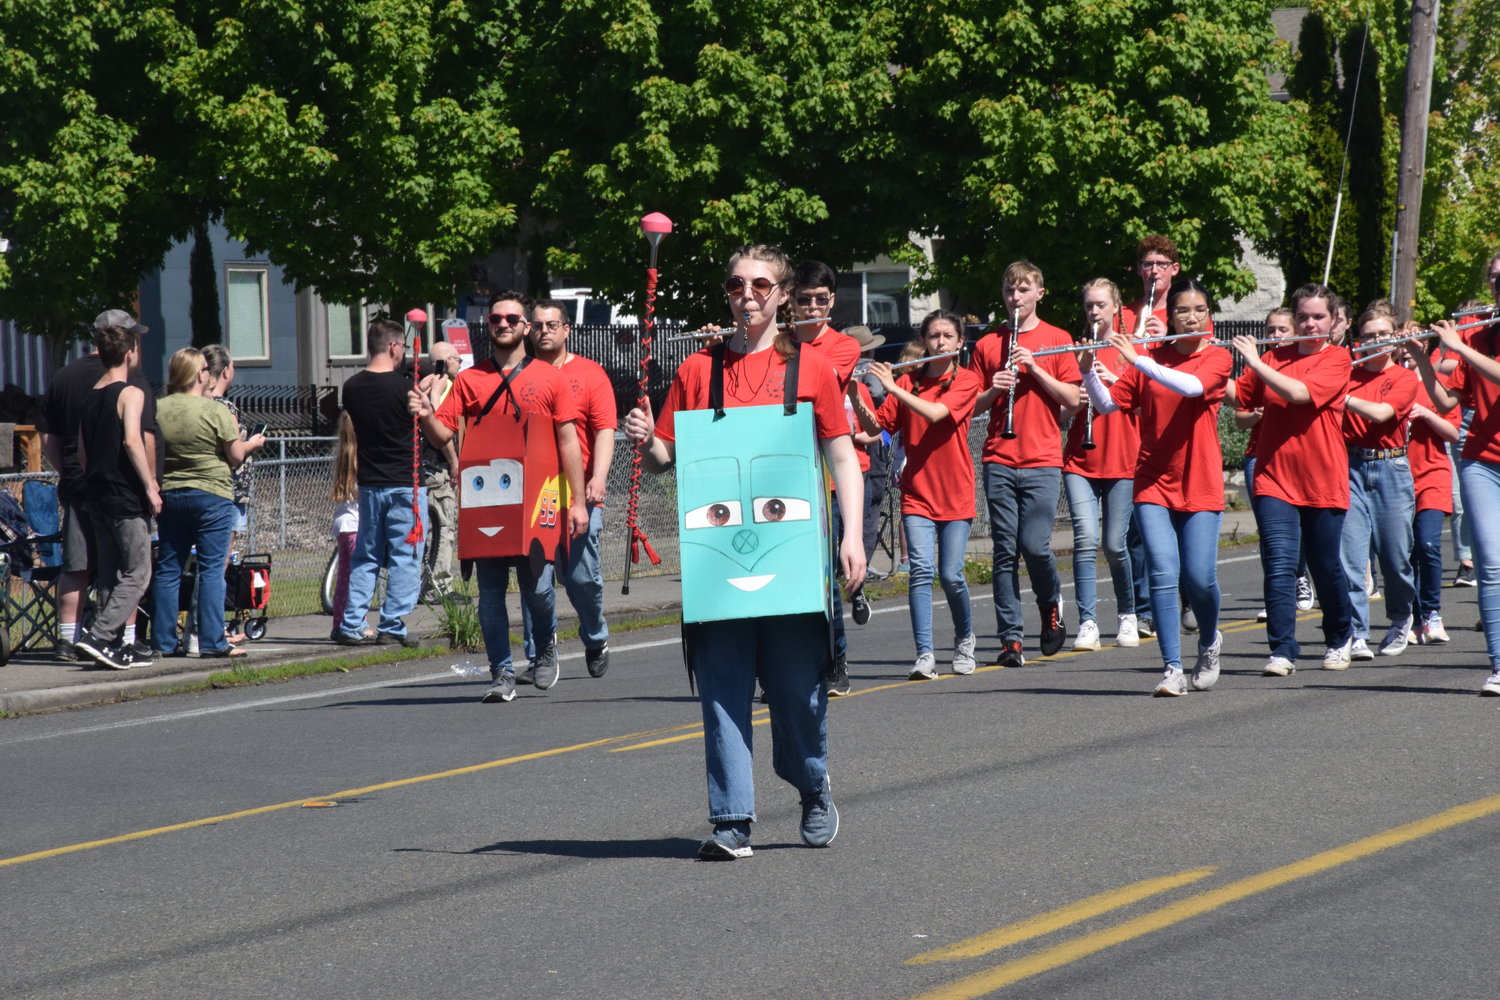 The Hazel Dell Parade of Bands will take place on Saturday, May 20.